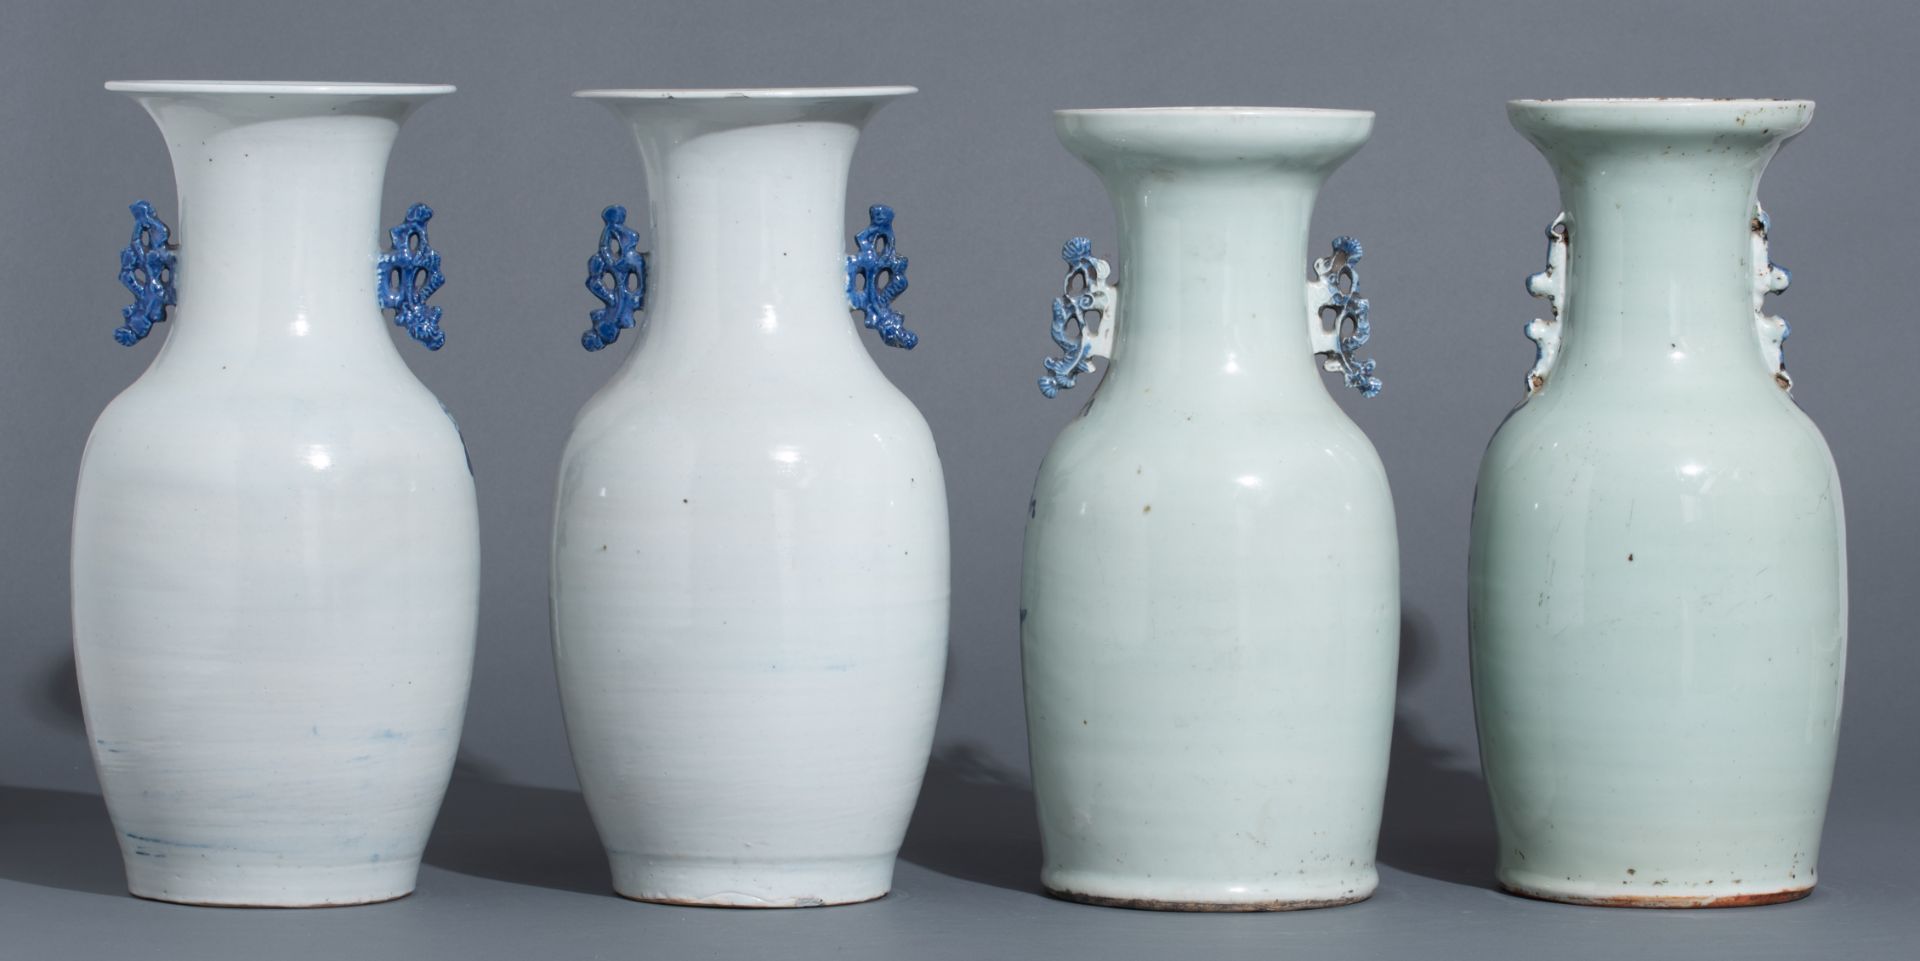 Four Chinese blue and white on celadon ground vases, late 19thC, H 42 - 43 cm - Image 30 of 52